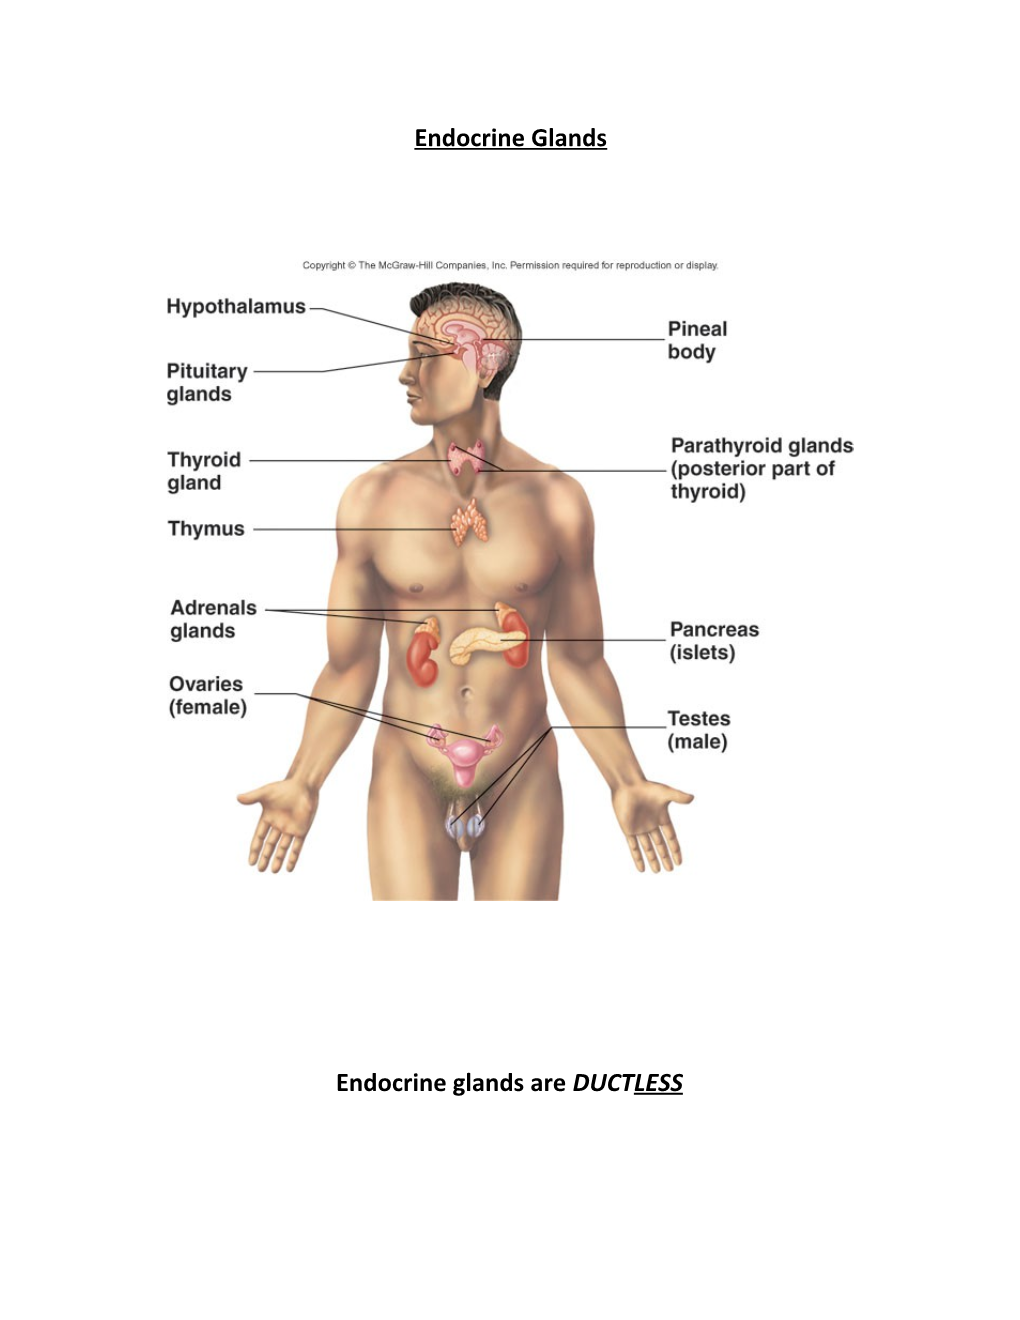 Endocrine Glands Are DUCTLESS